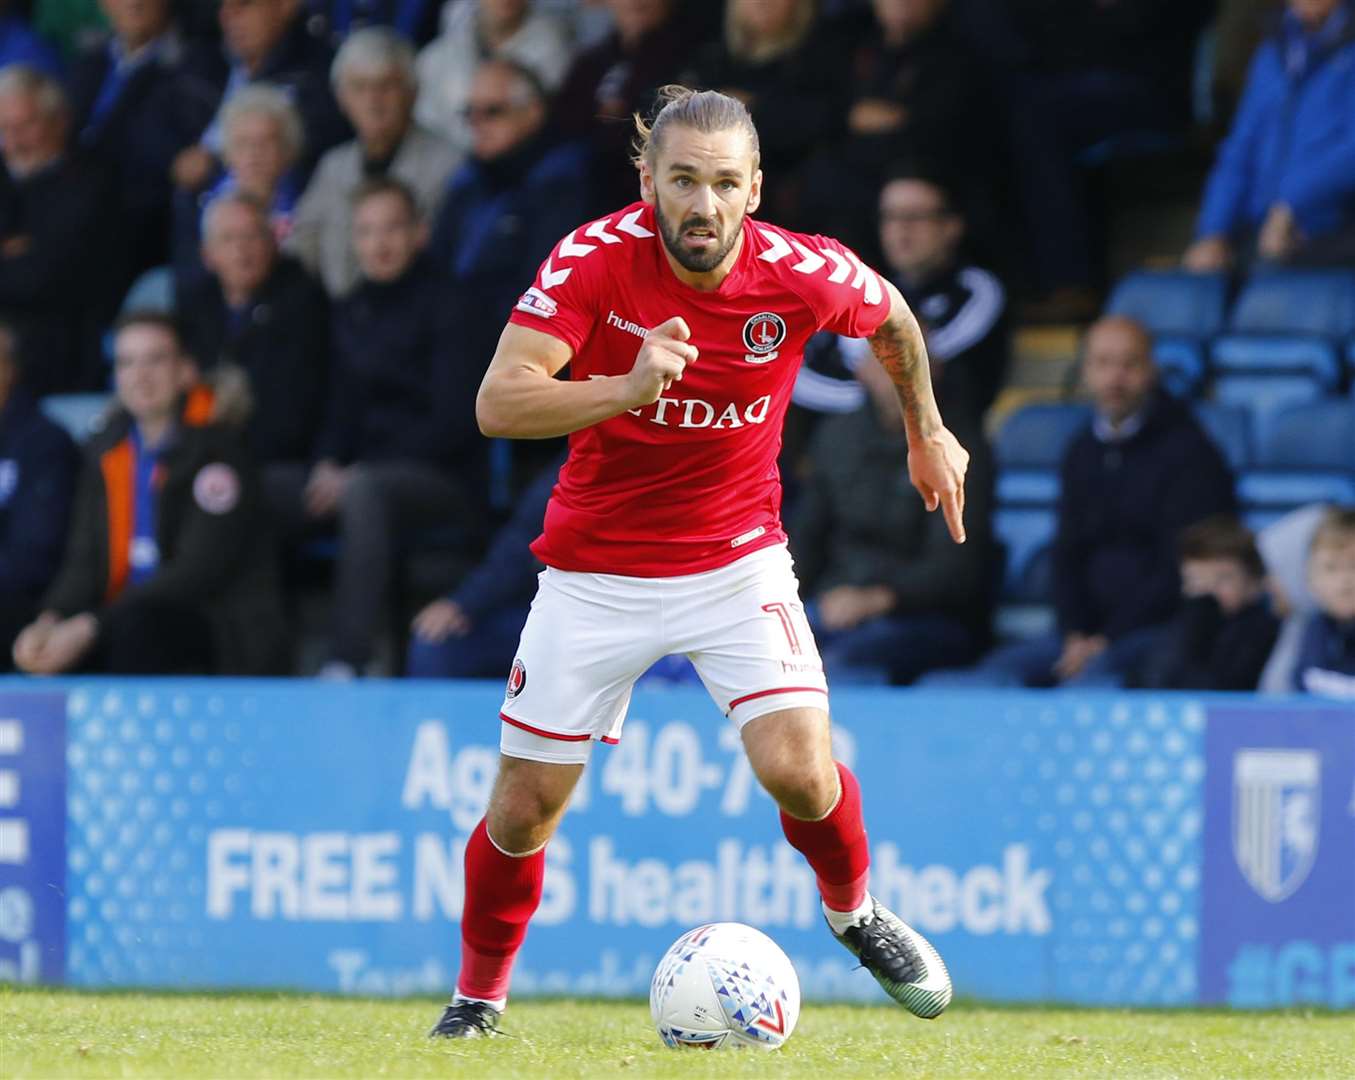 Former Charlton player Ricky Holmes has joined Gillingham